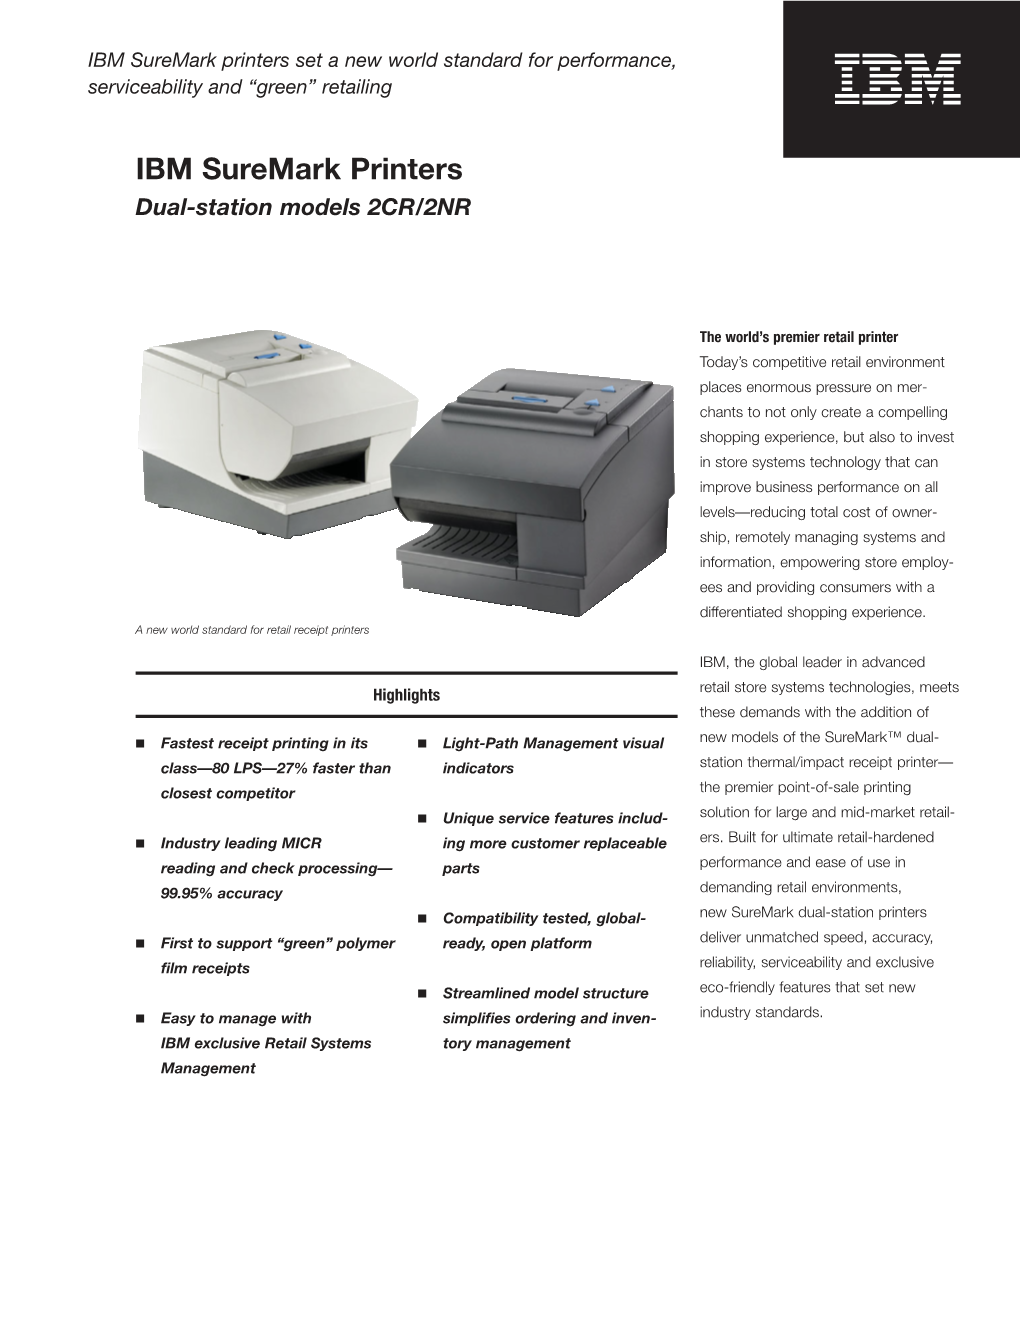 IBM Suremark Printers Set a New World Standard for Performance, Serviceability and “Green” Retailing